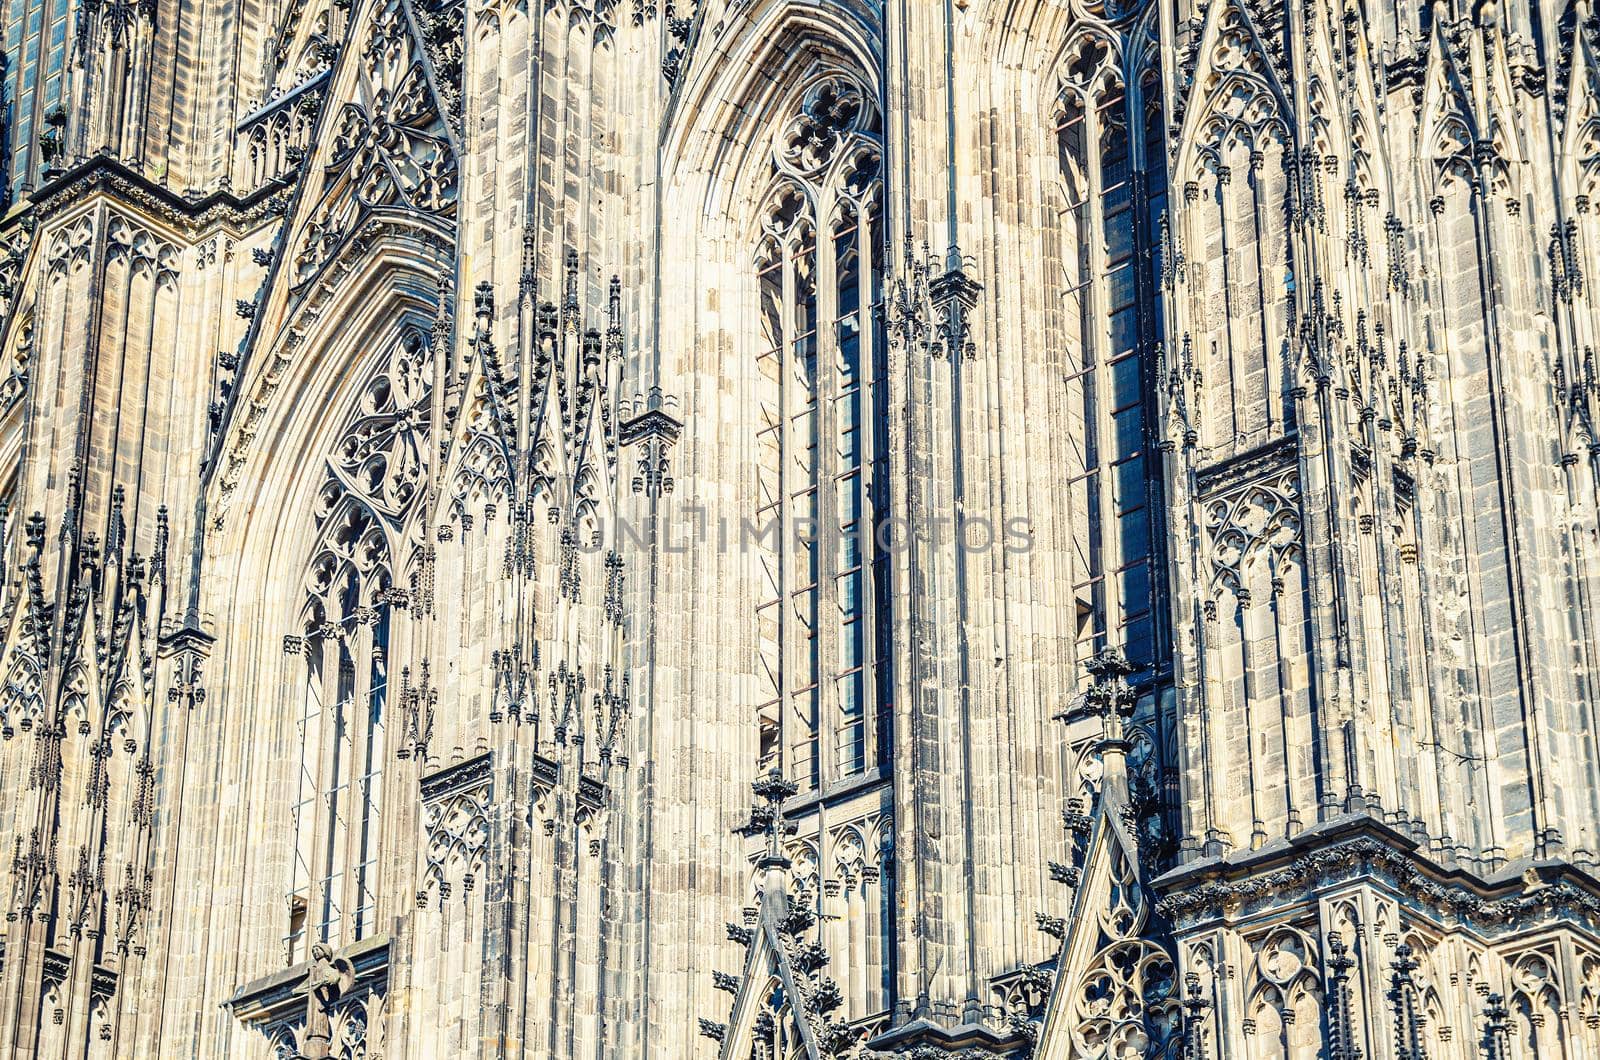 Close-up view of Cologne Cathedral Catholic Church gothic style building wall facade with ornaments, moldings stucco work and stained glass windows, North Rhine-Westphalia, Germany